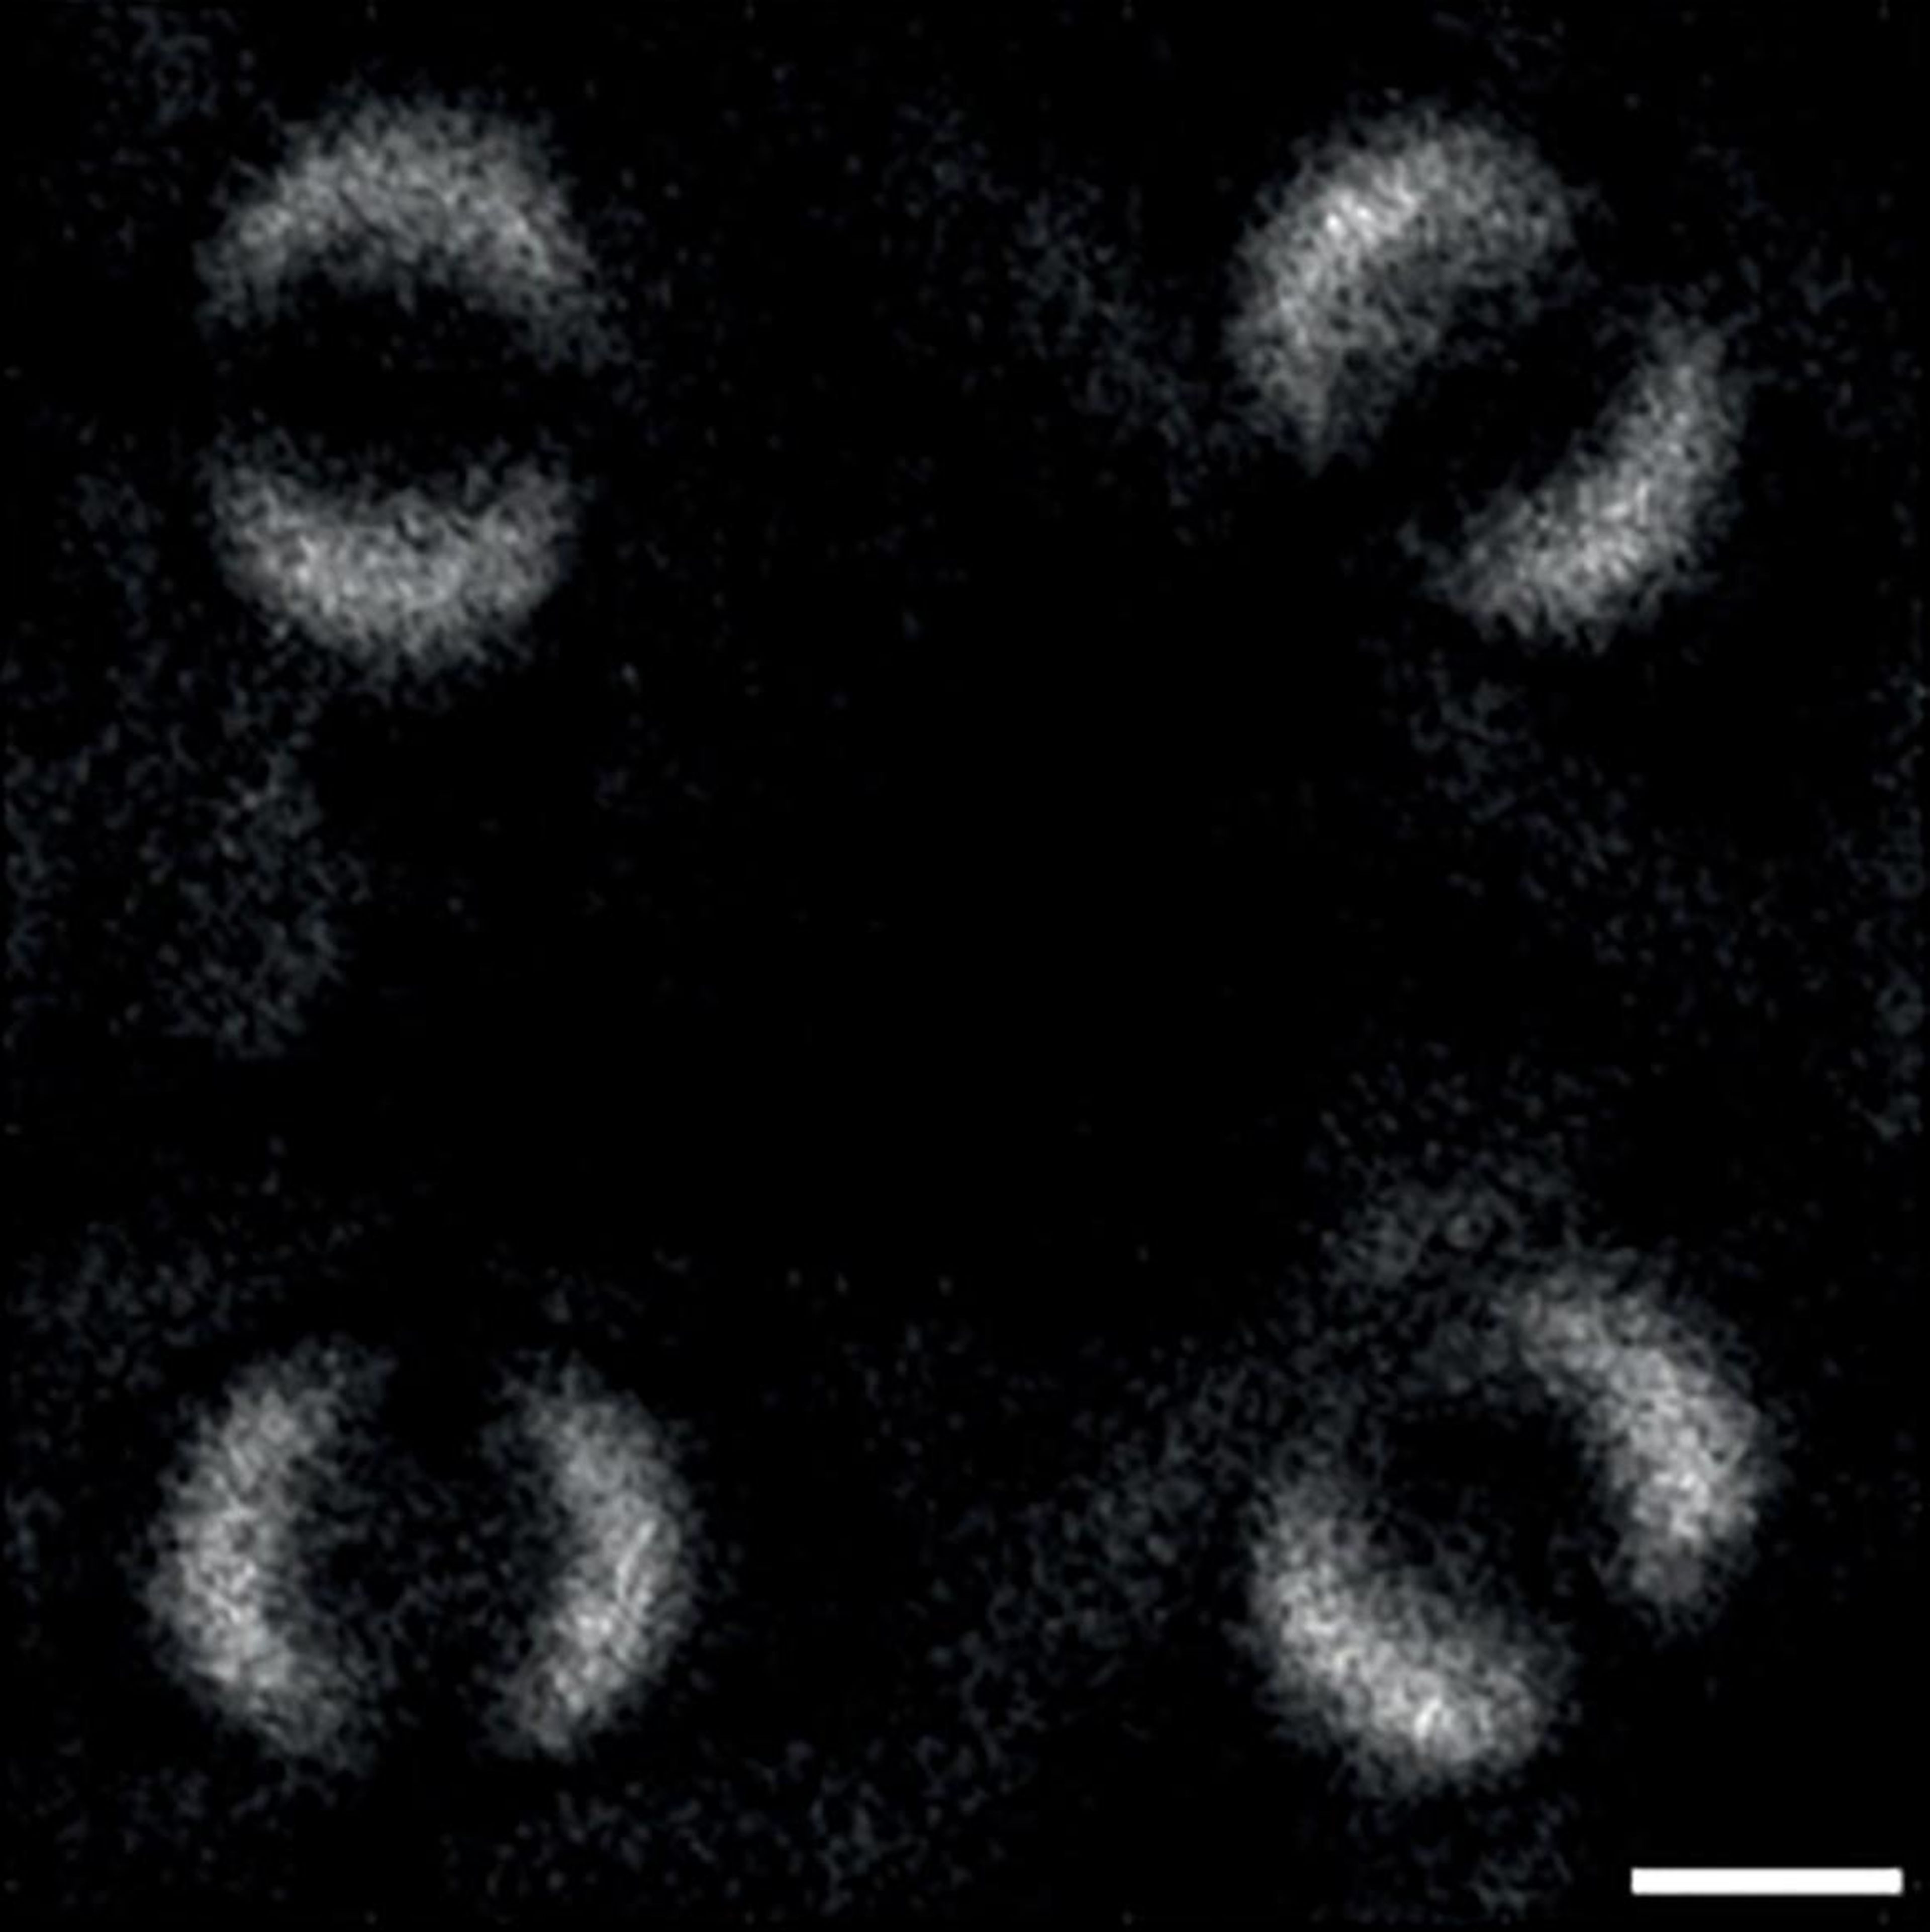 The first-ever photo showing quantum entanglement.